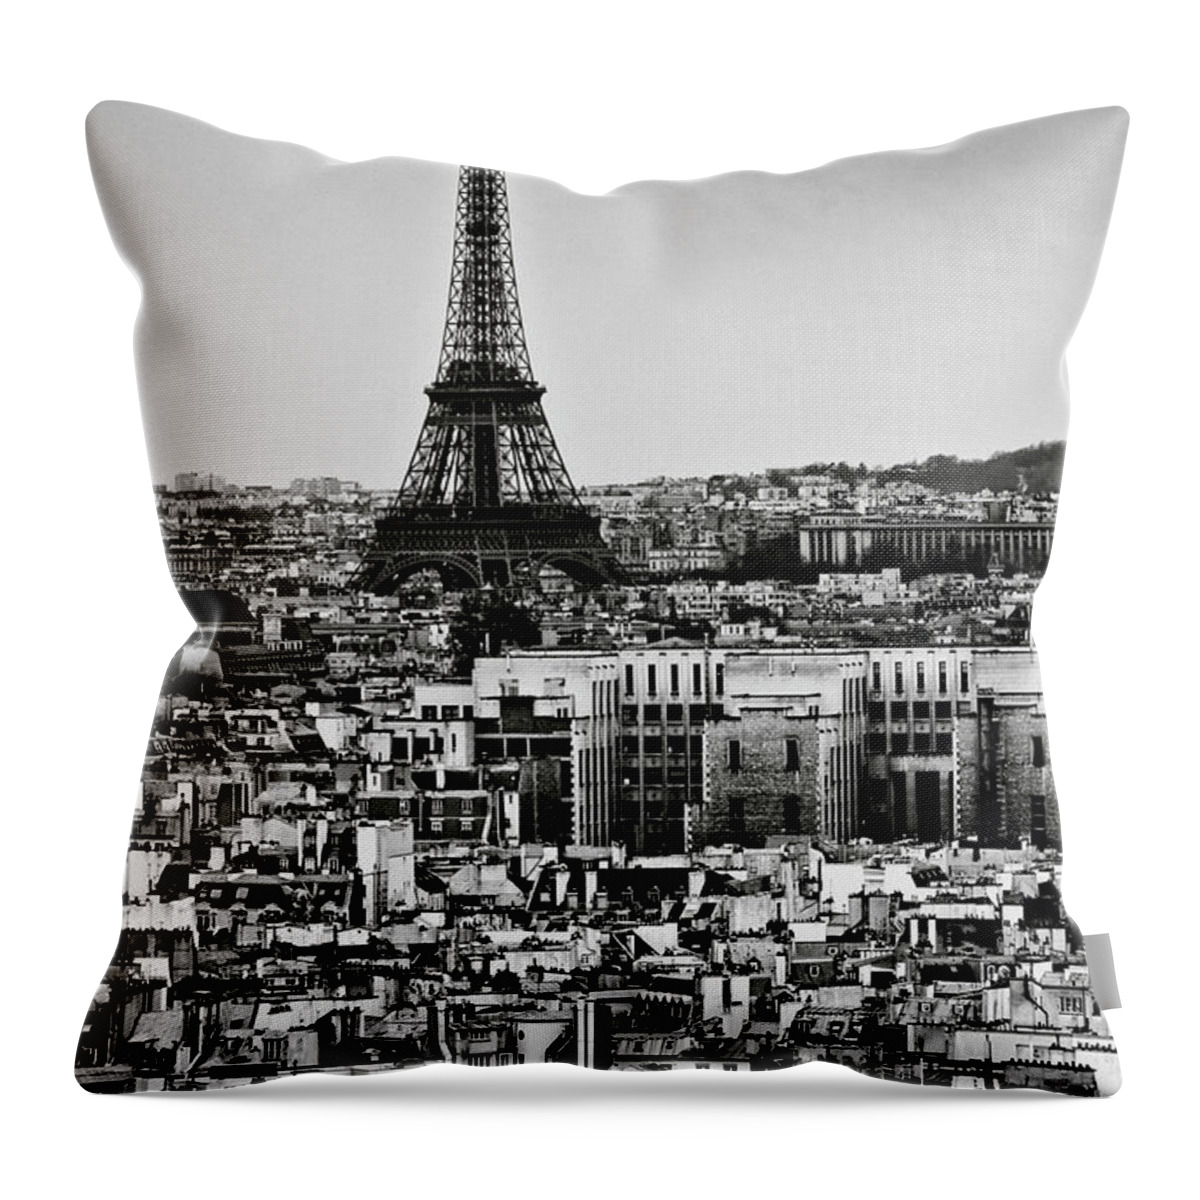 Outdoors Throw Pillow featuring the photograph Cityscape Of Paris by Sbk 20d Pictures